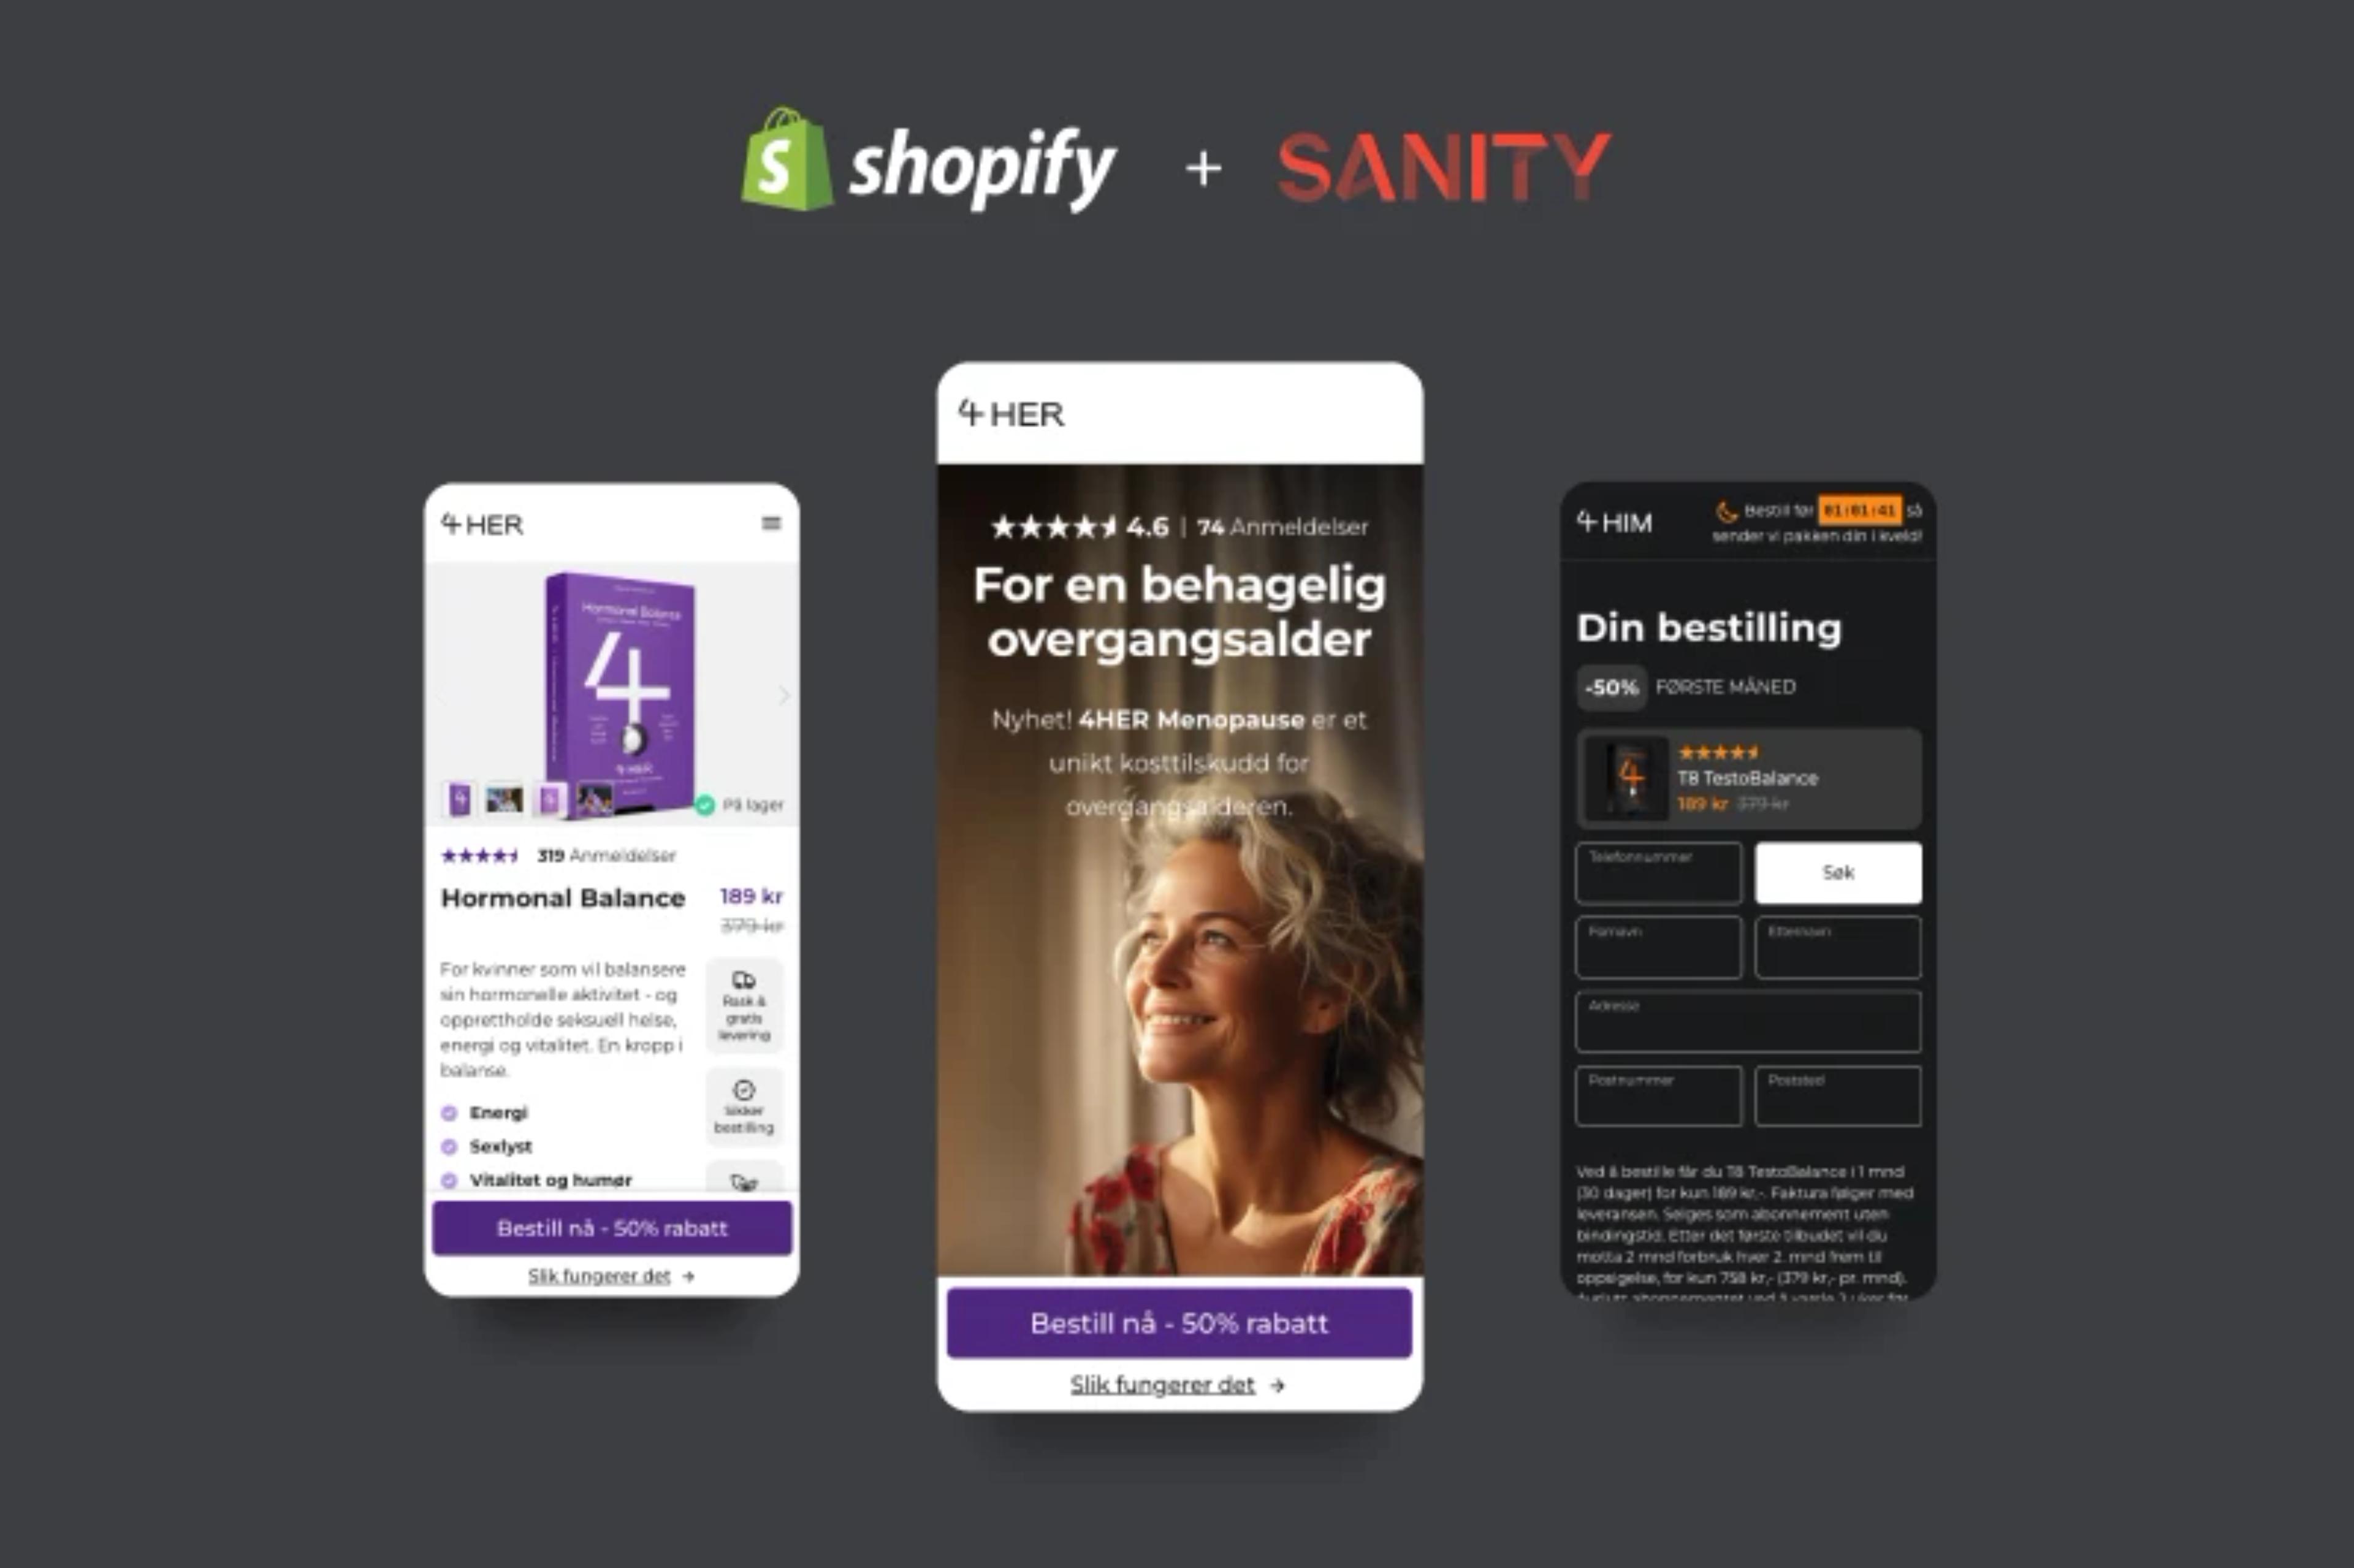 a screenshot of a website called shopify and sanity